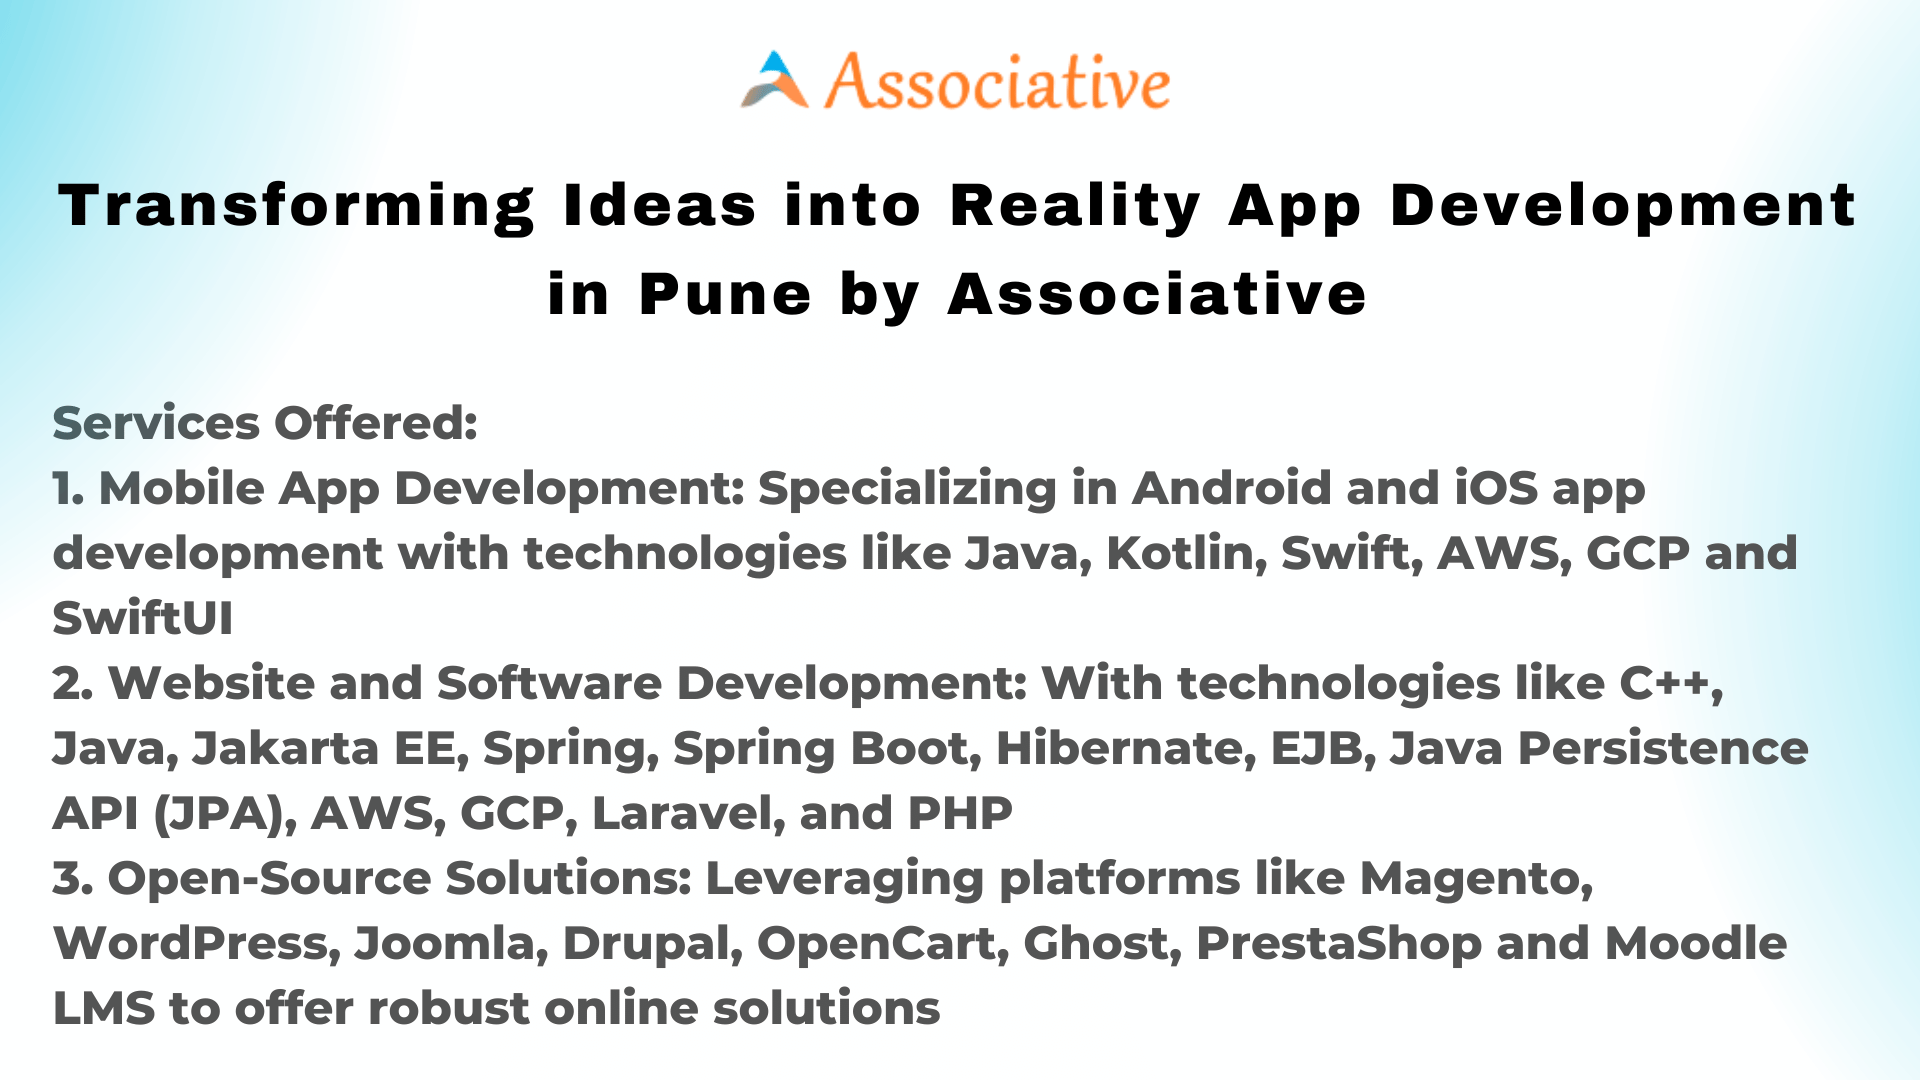 Transforming Ideas into Reality App Development in Pune by Associative